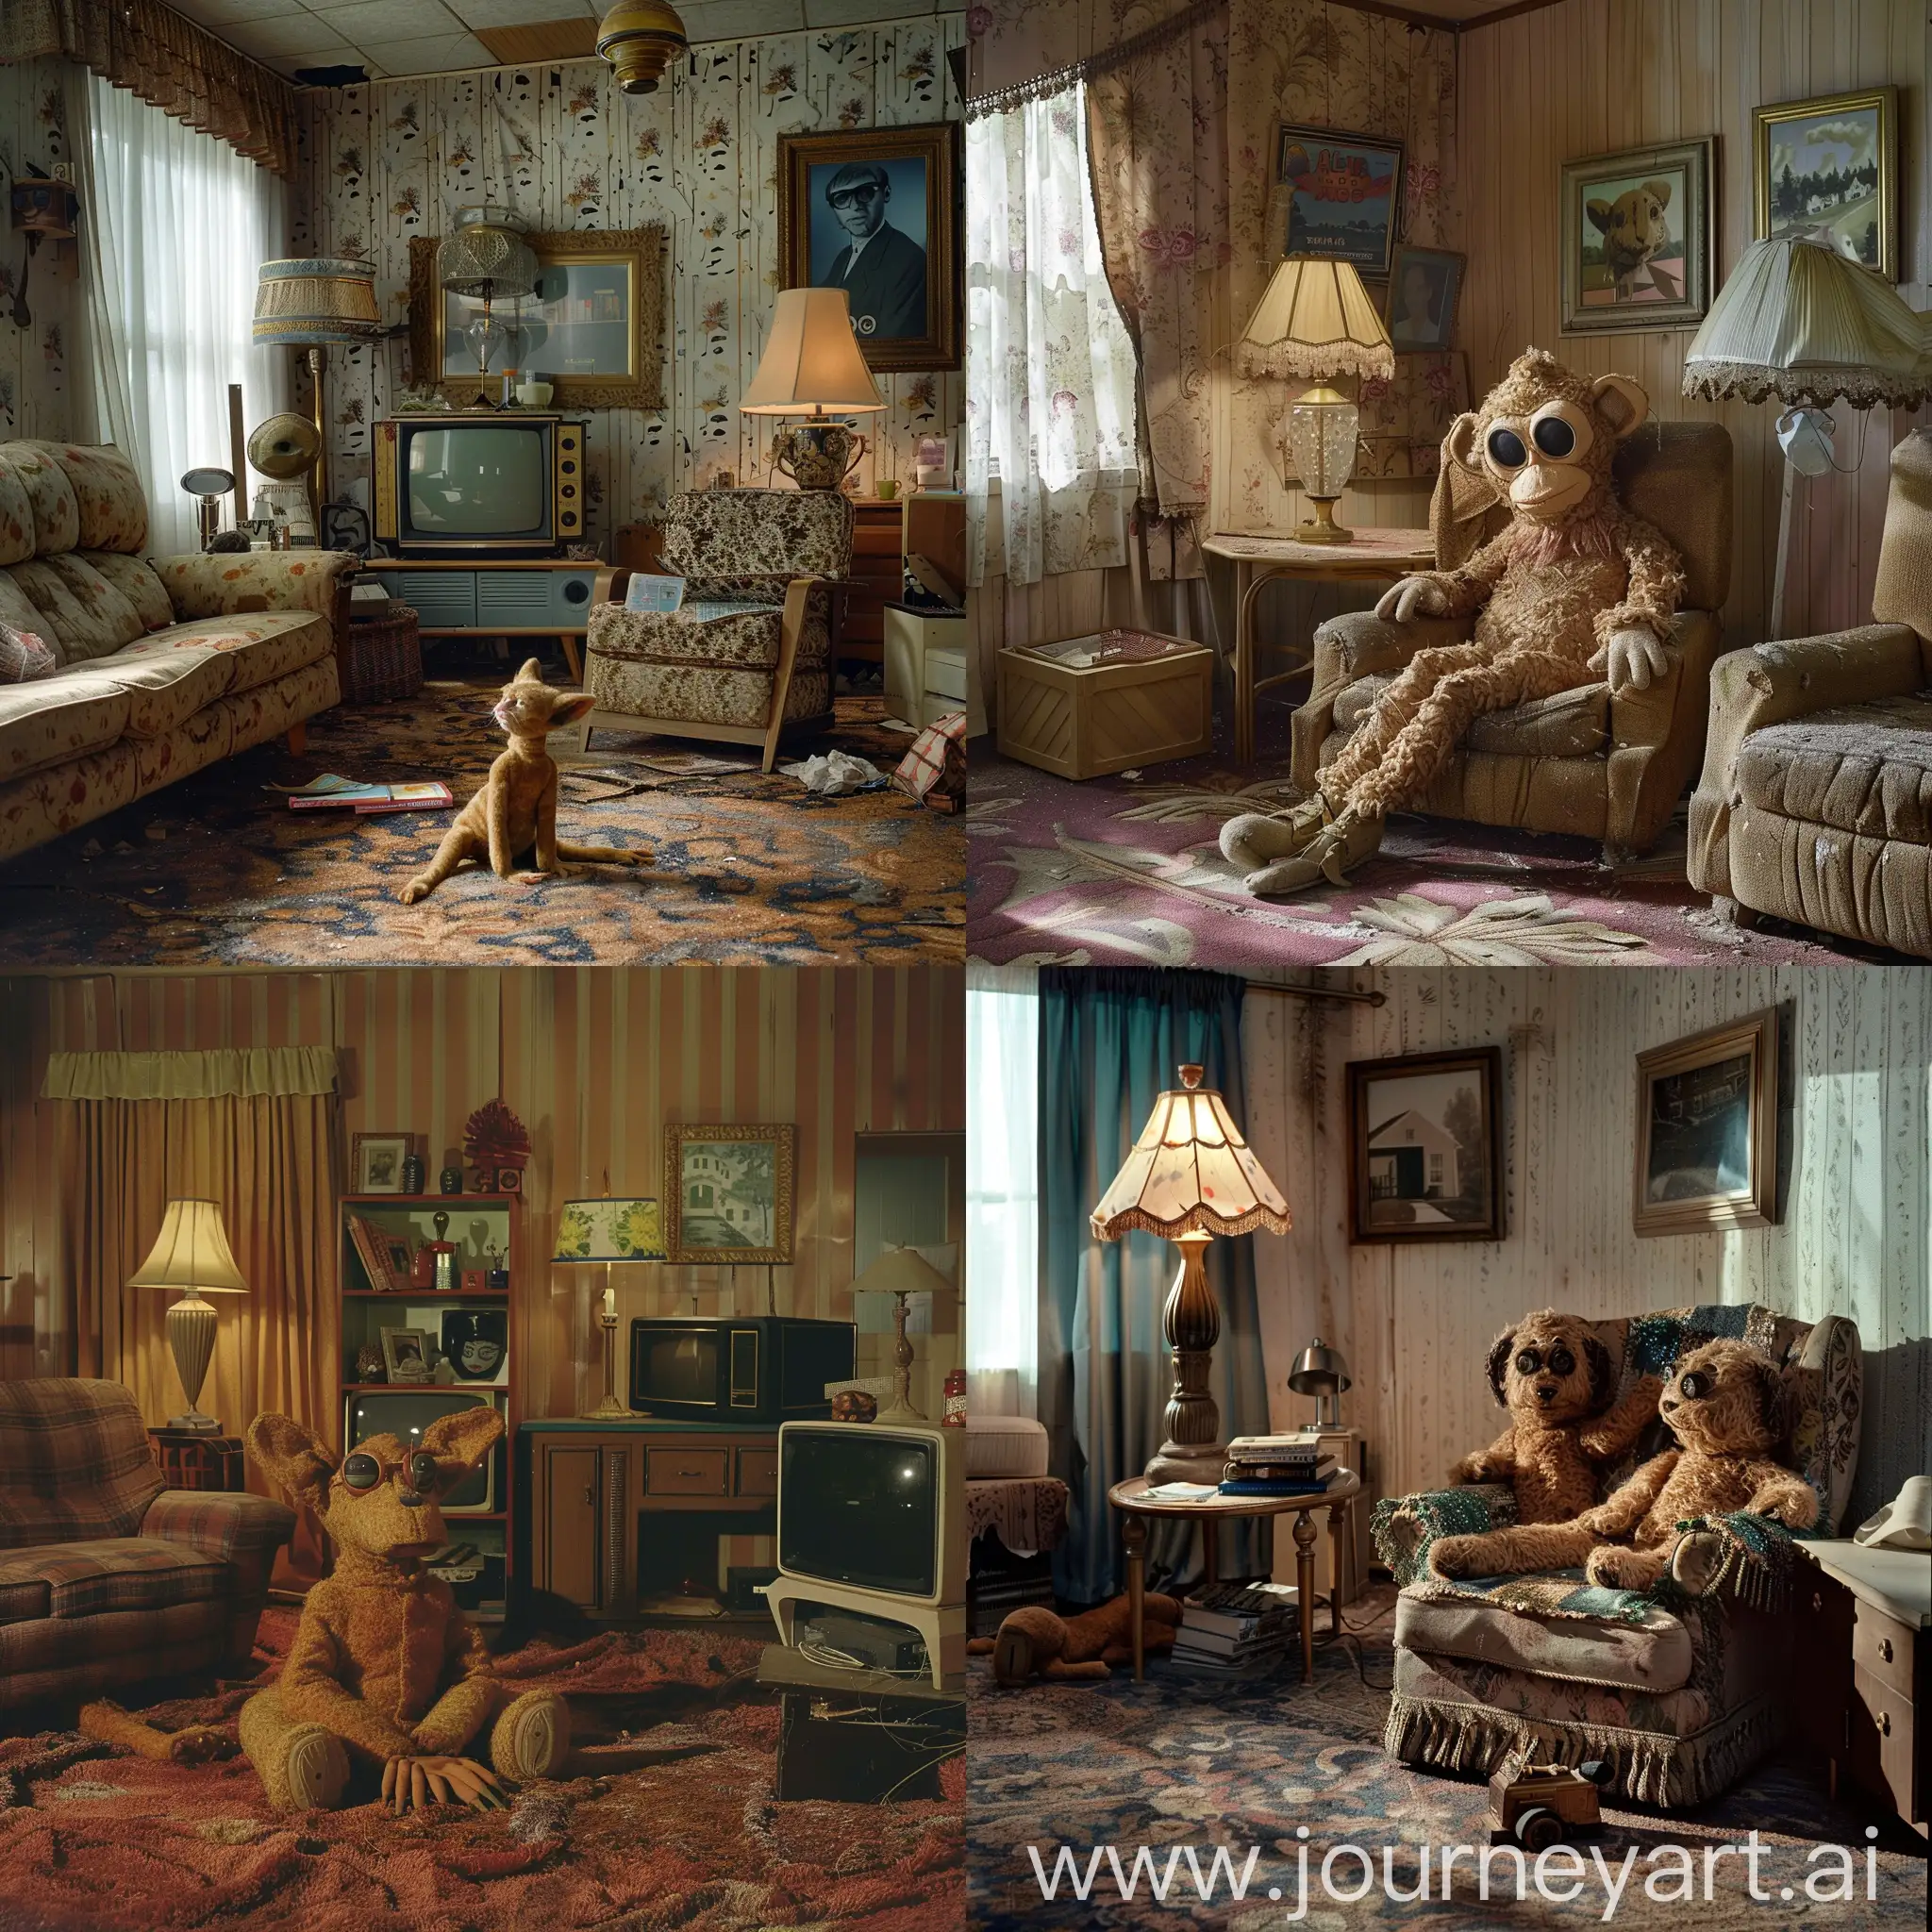 Alf-Portrait-TV-Show-Footage-in-Abandoned-American-Mid-Century-Suburbia